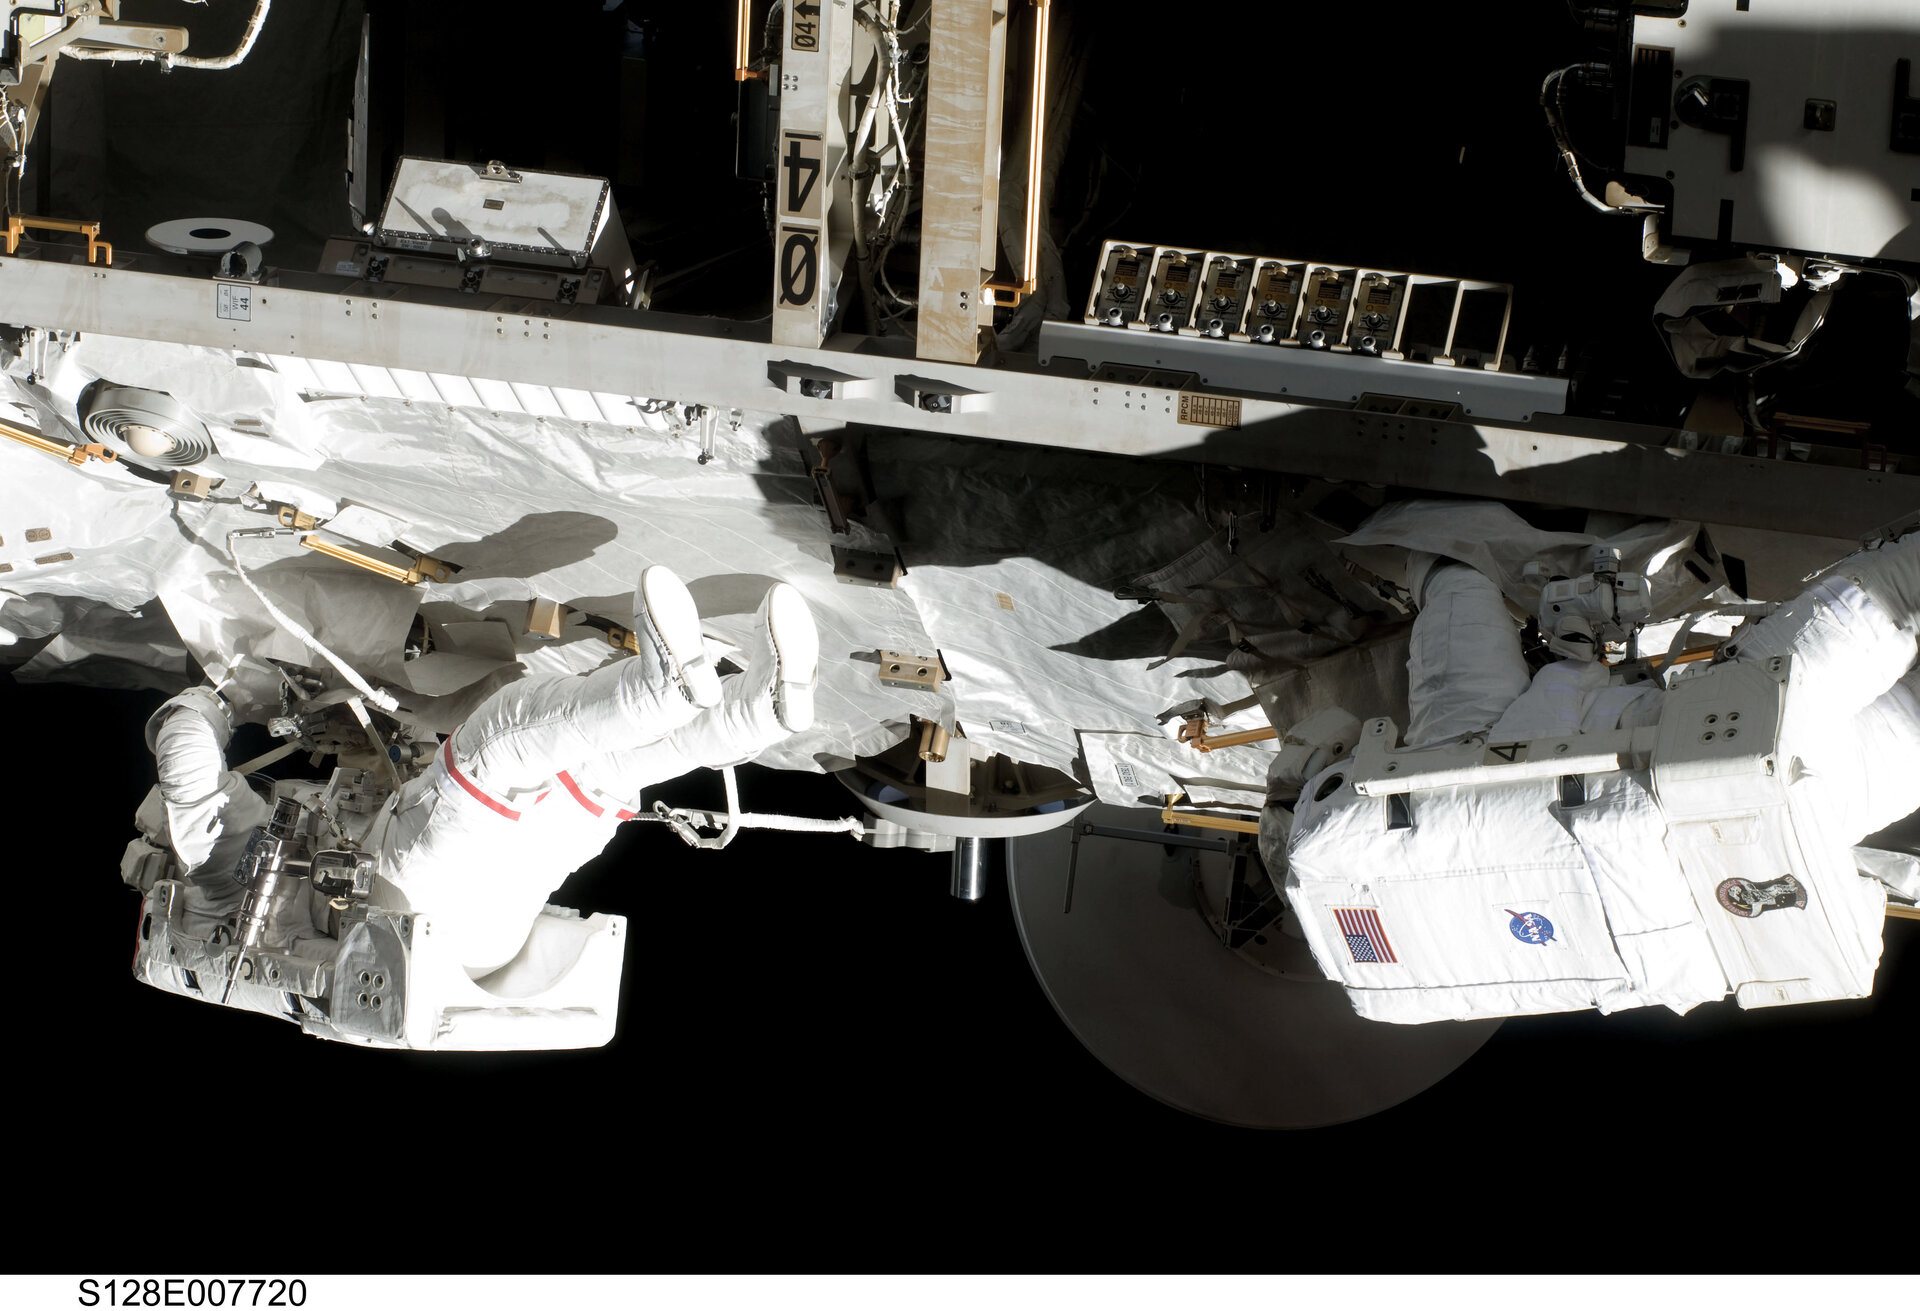 Fuglesang and Olivas participate in the third STS-128 spacewalk outside the ISS